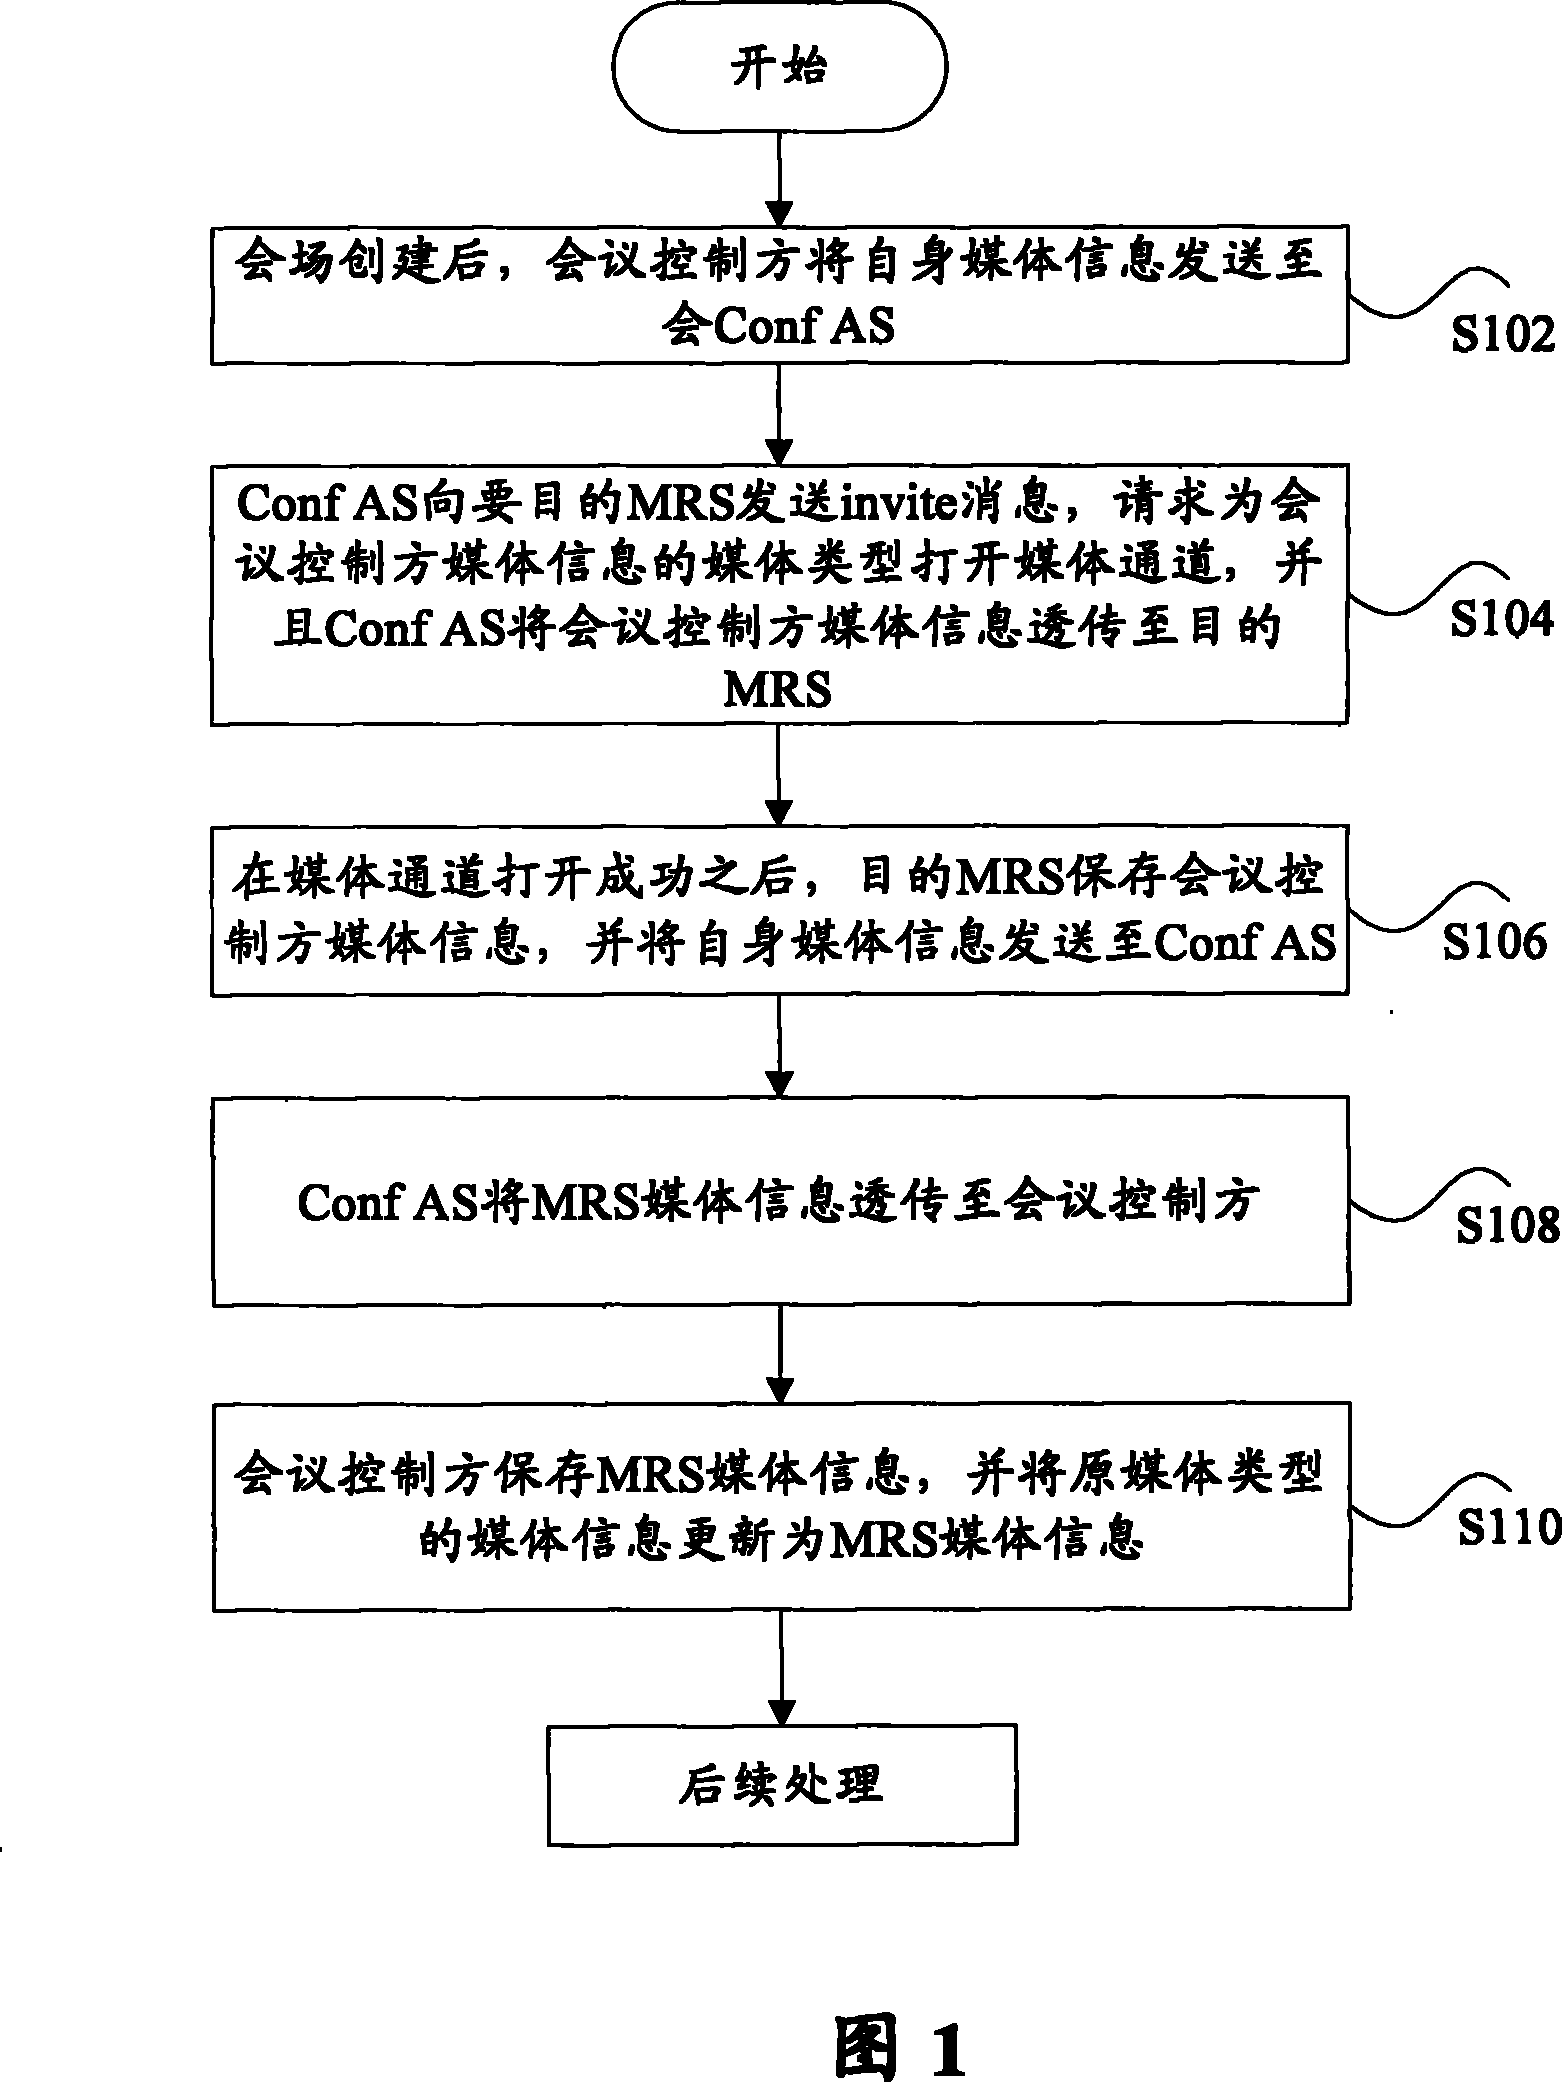 Switching method for media devices